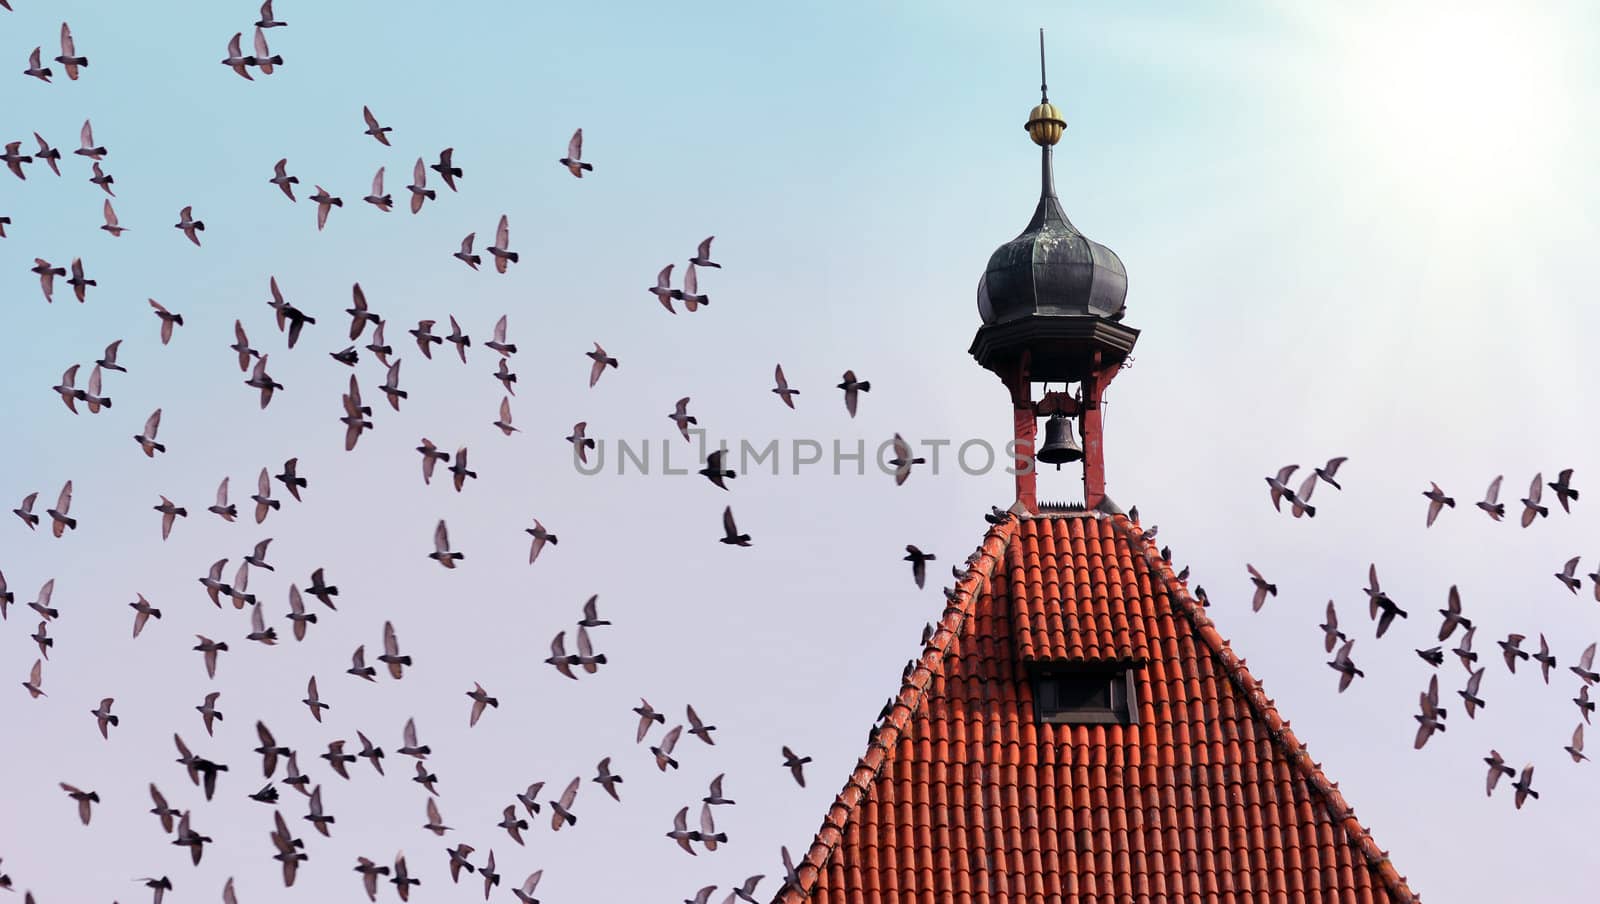 old tower with bell and many flying birds